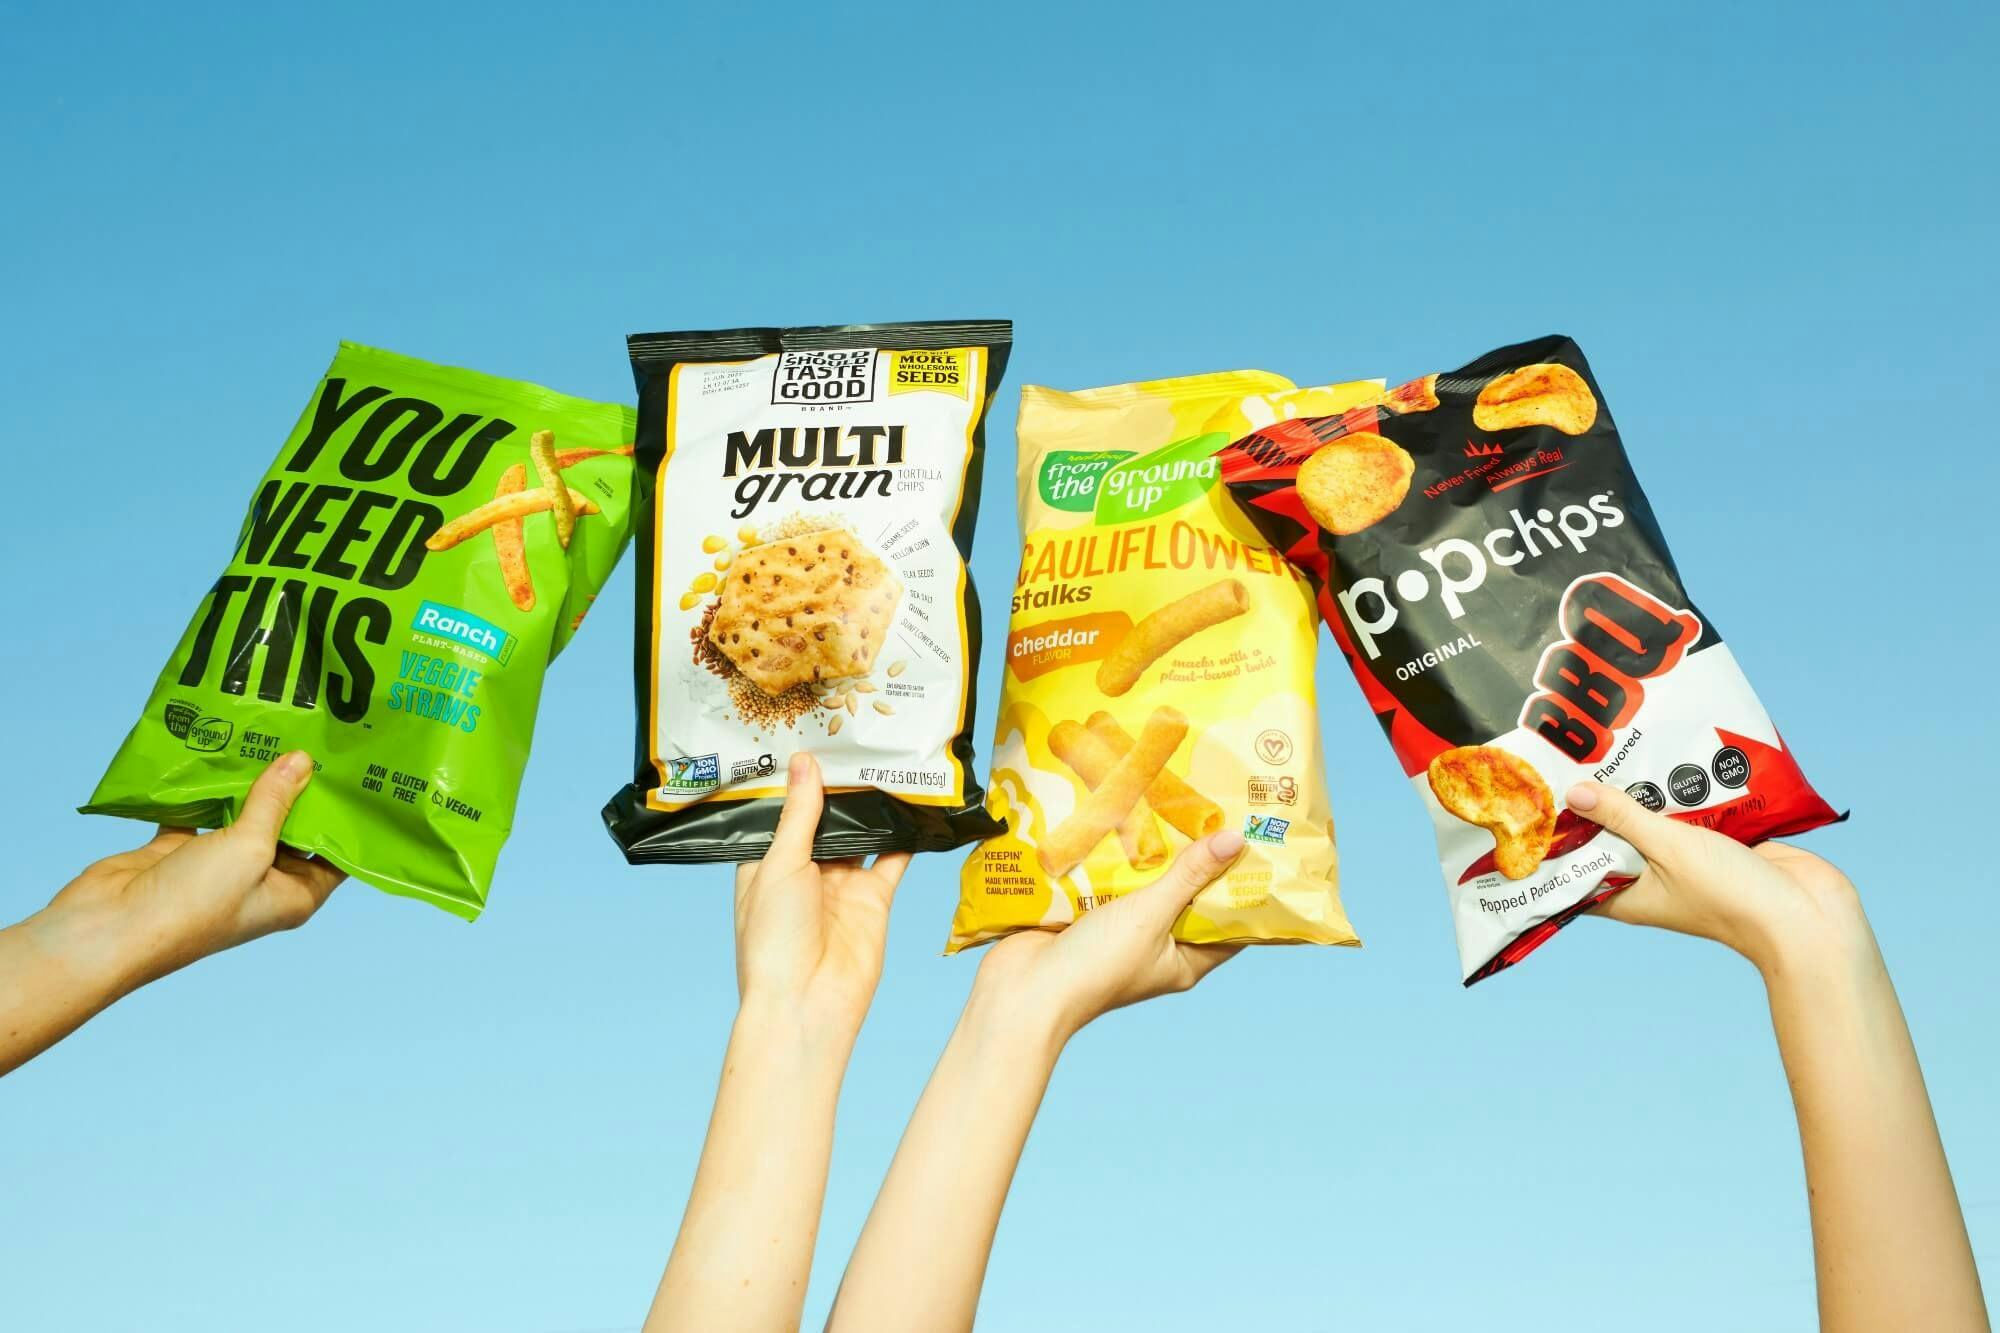 Our Home snack brands held up into the air.